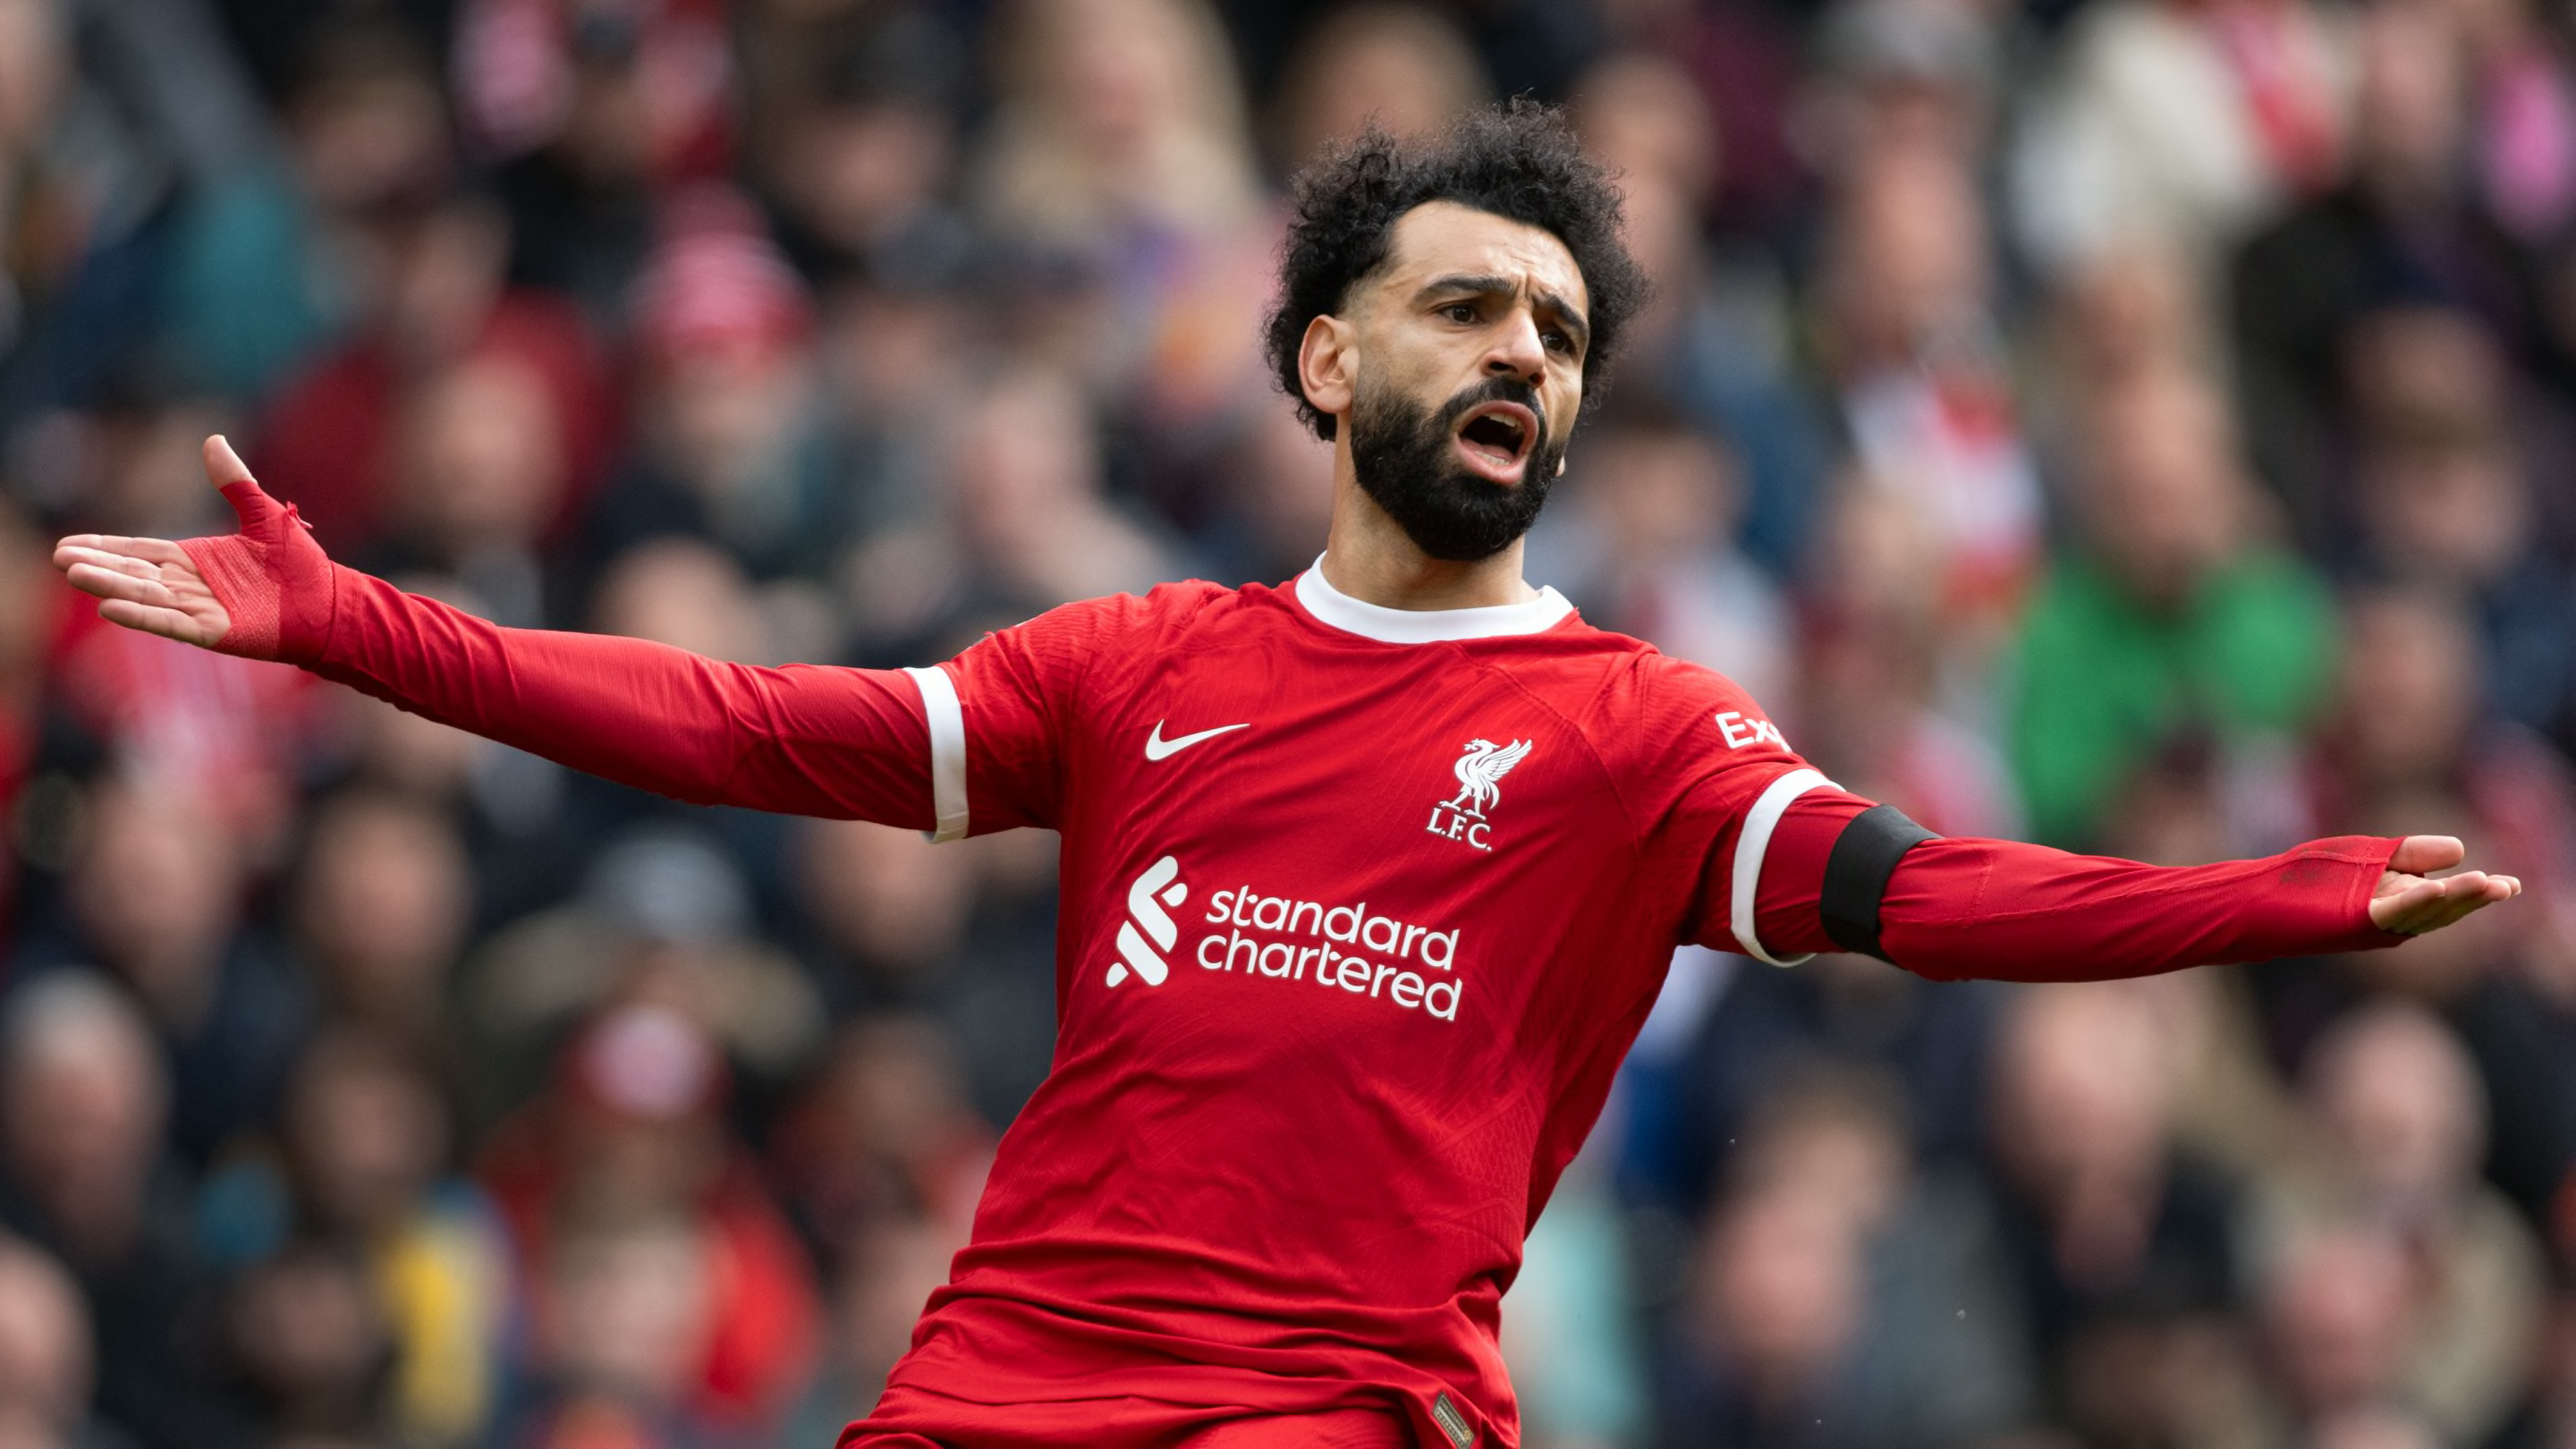 Footballs fans decide if Liverpool should sell Mohamed Salah in YouGov poll